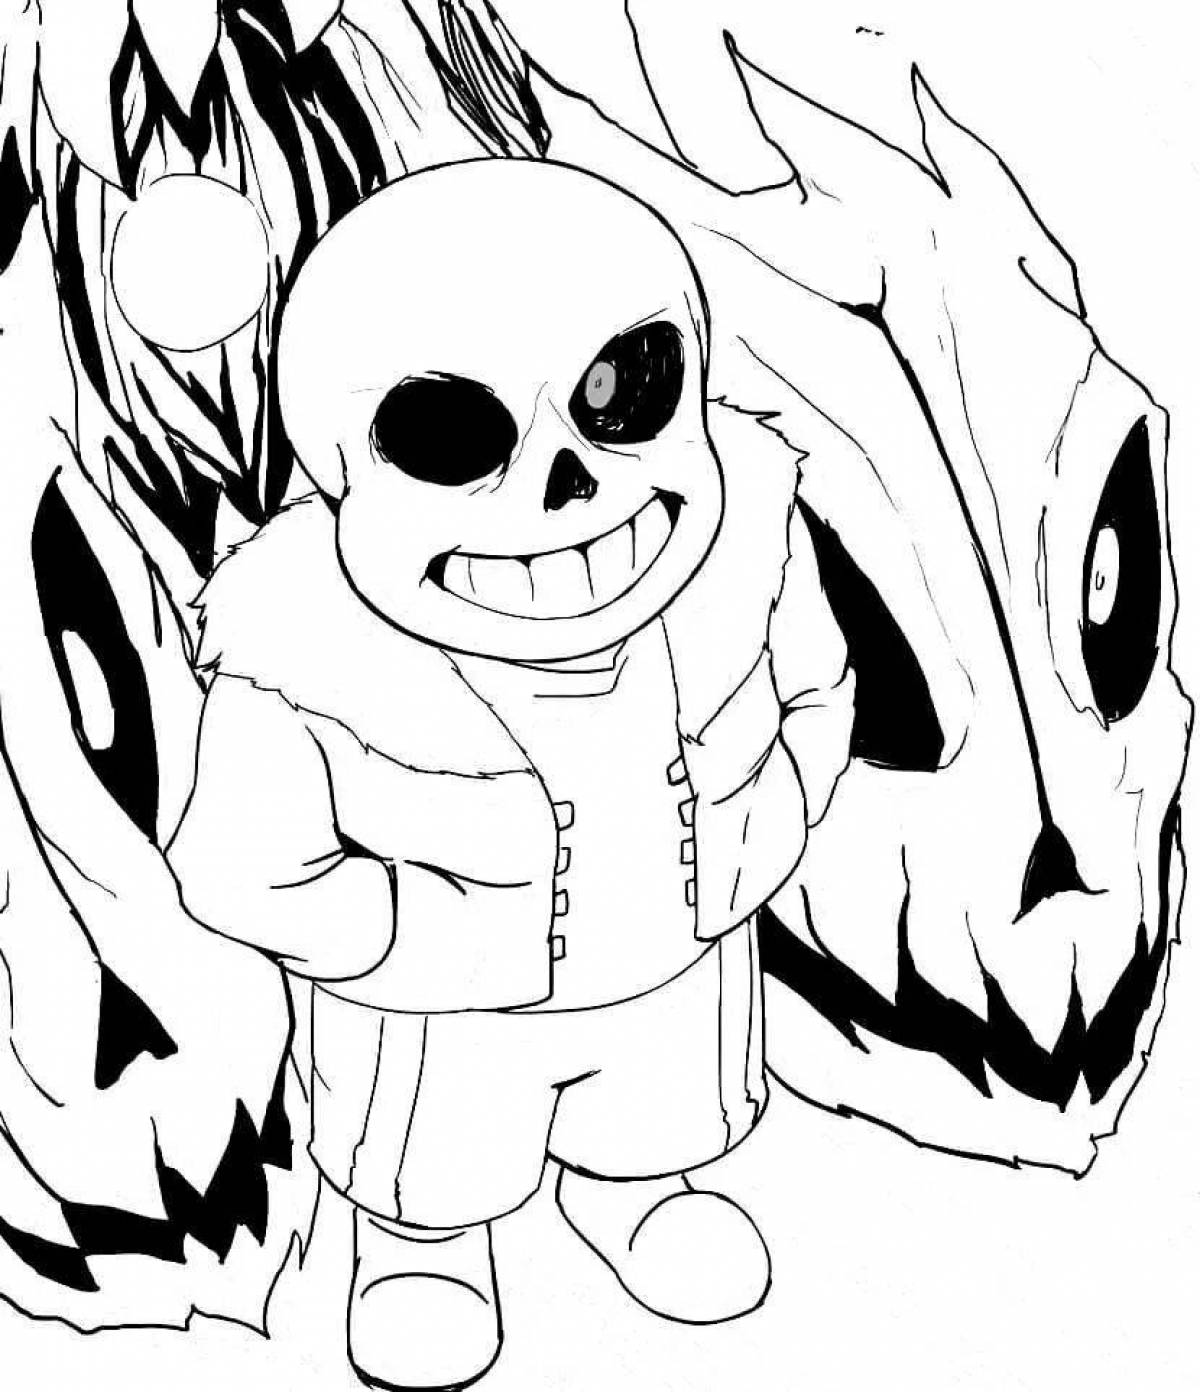 An exciting undertale coloring book